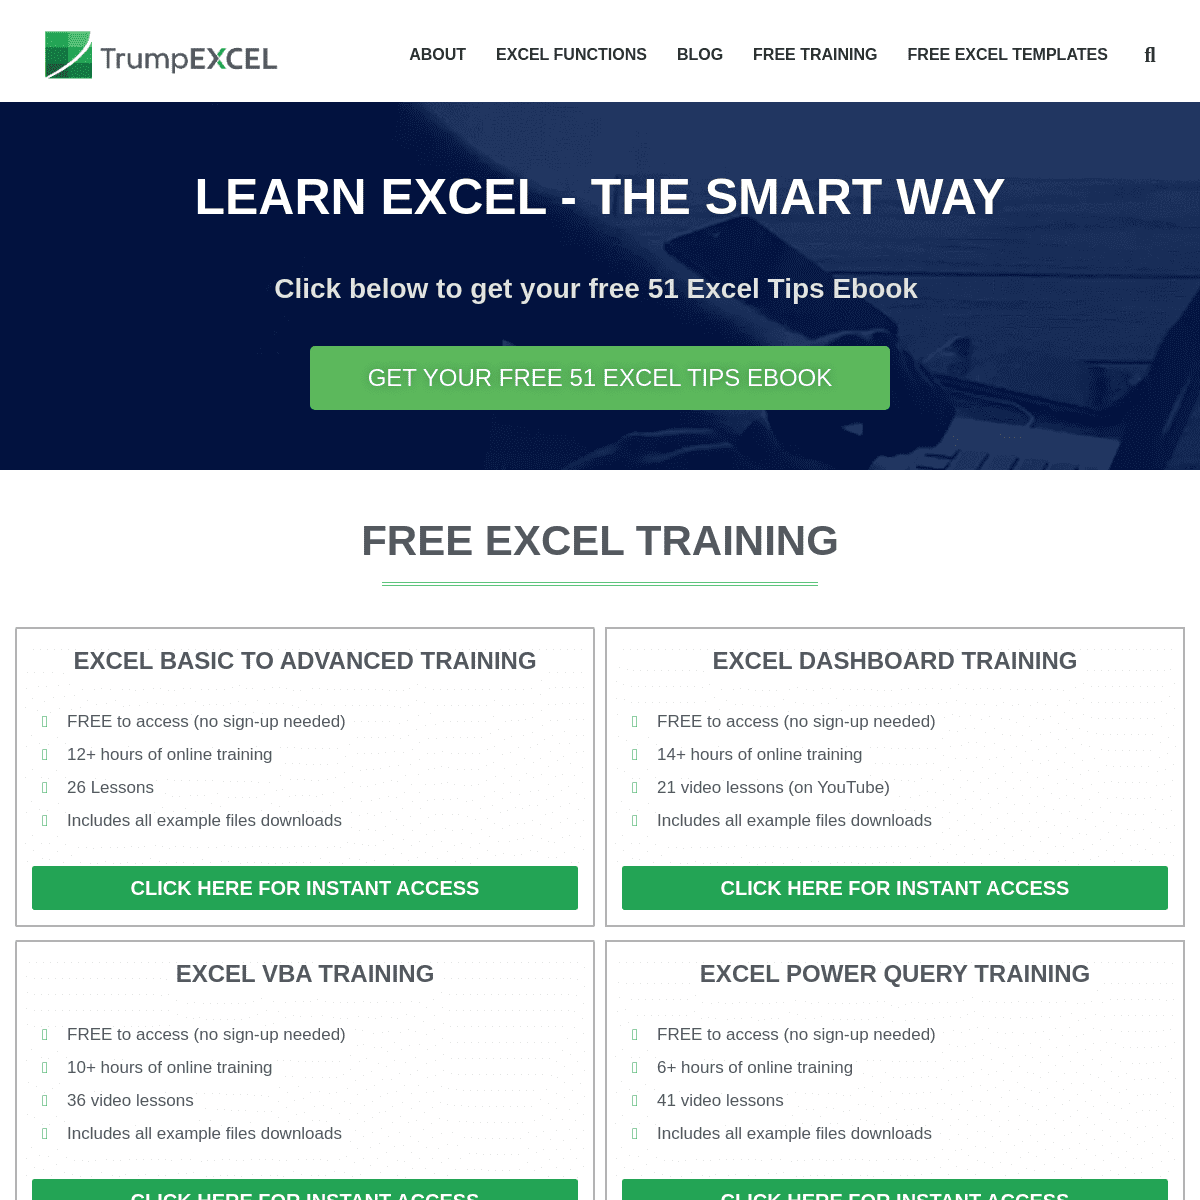 A complete backup of https://trumpexcel.com